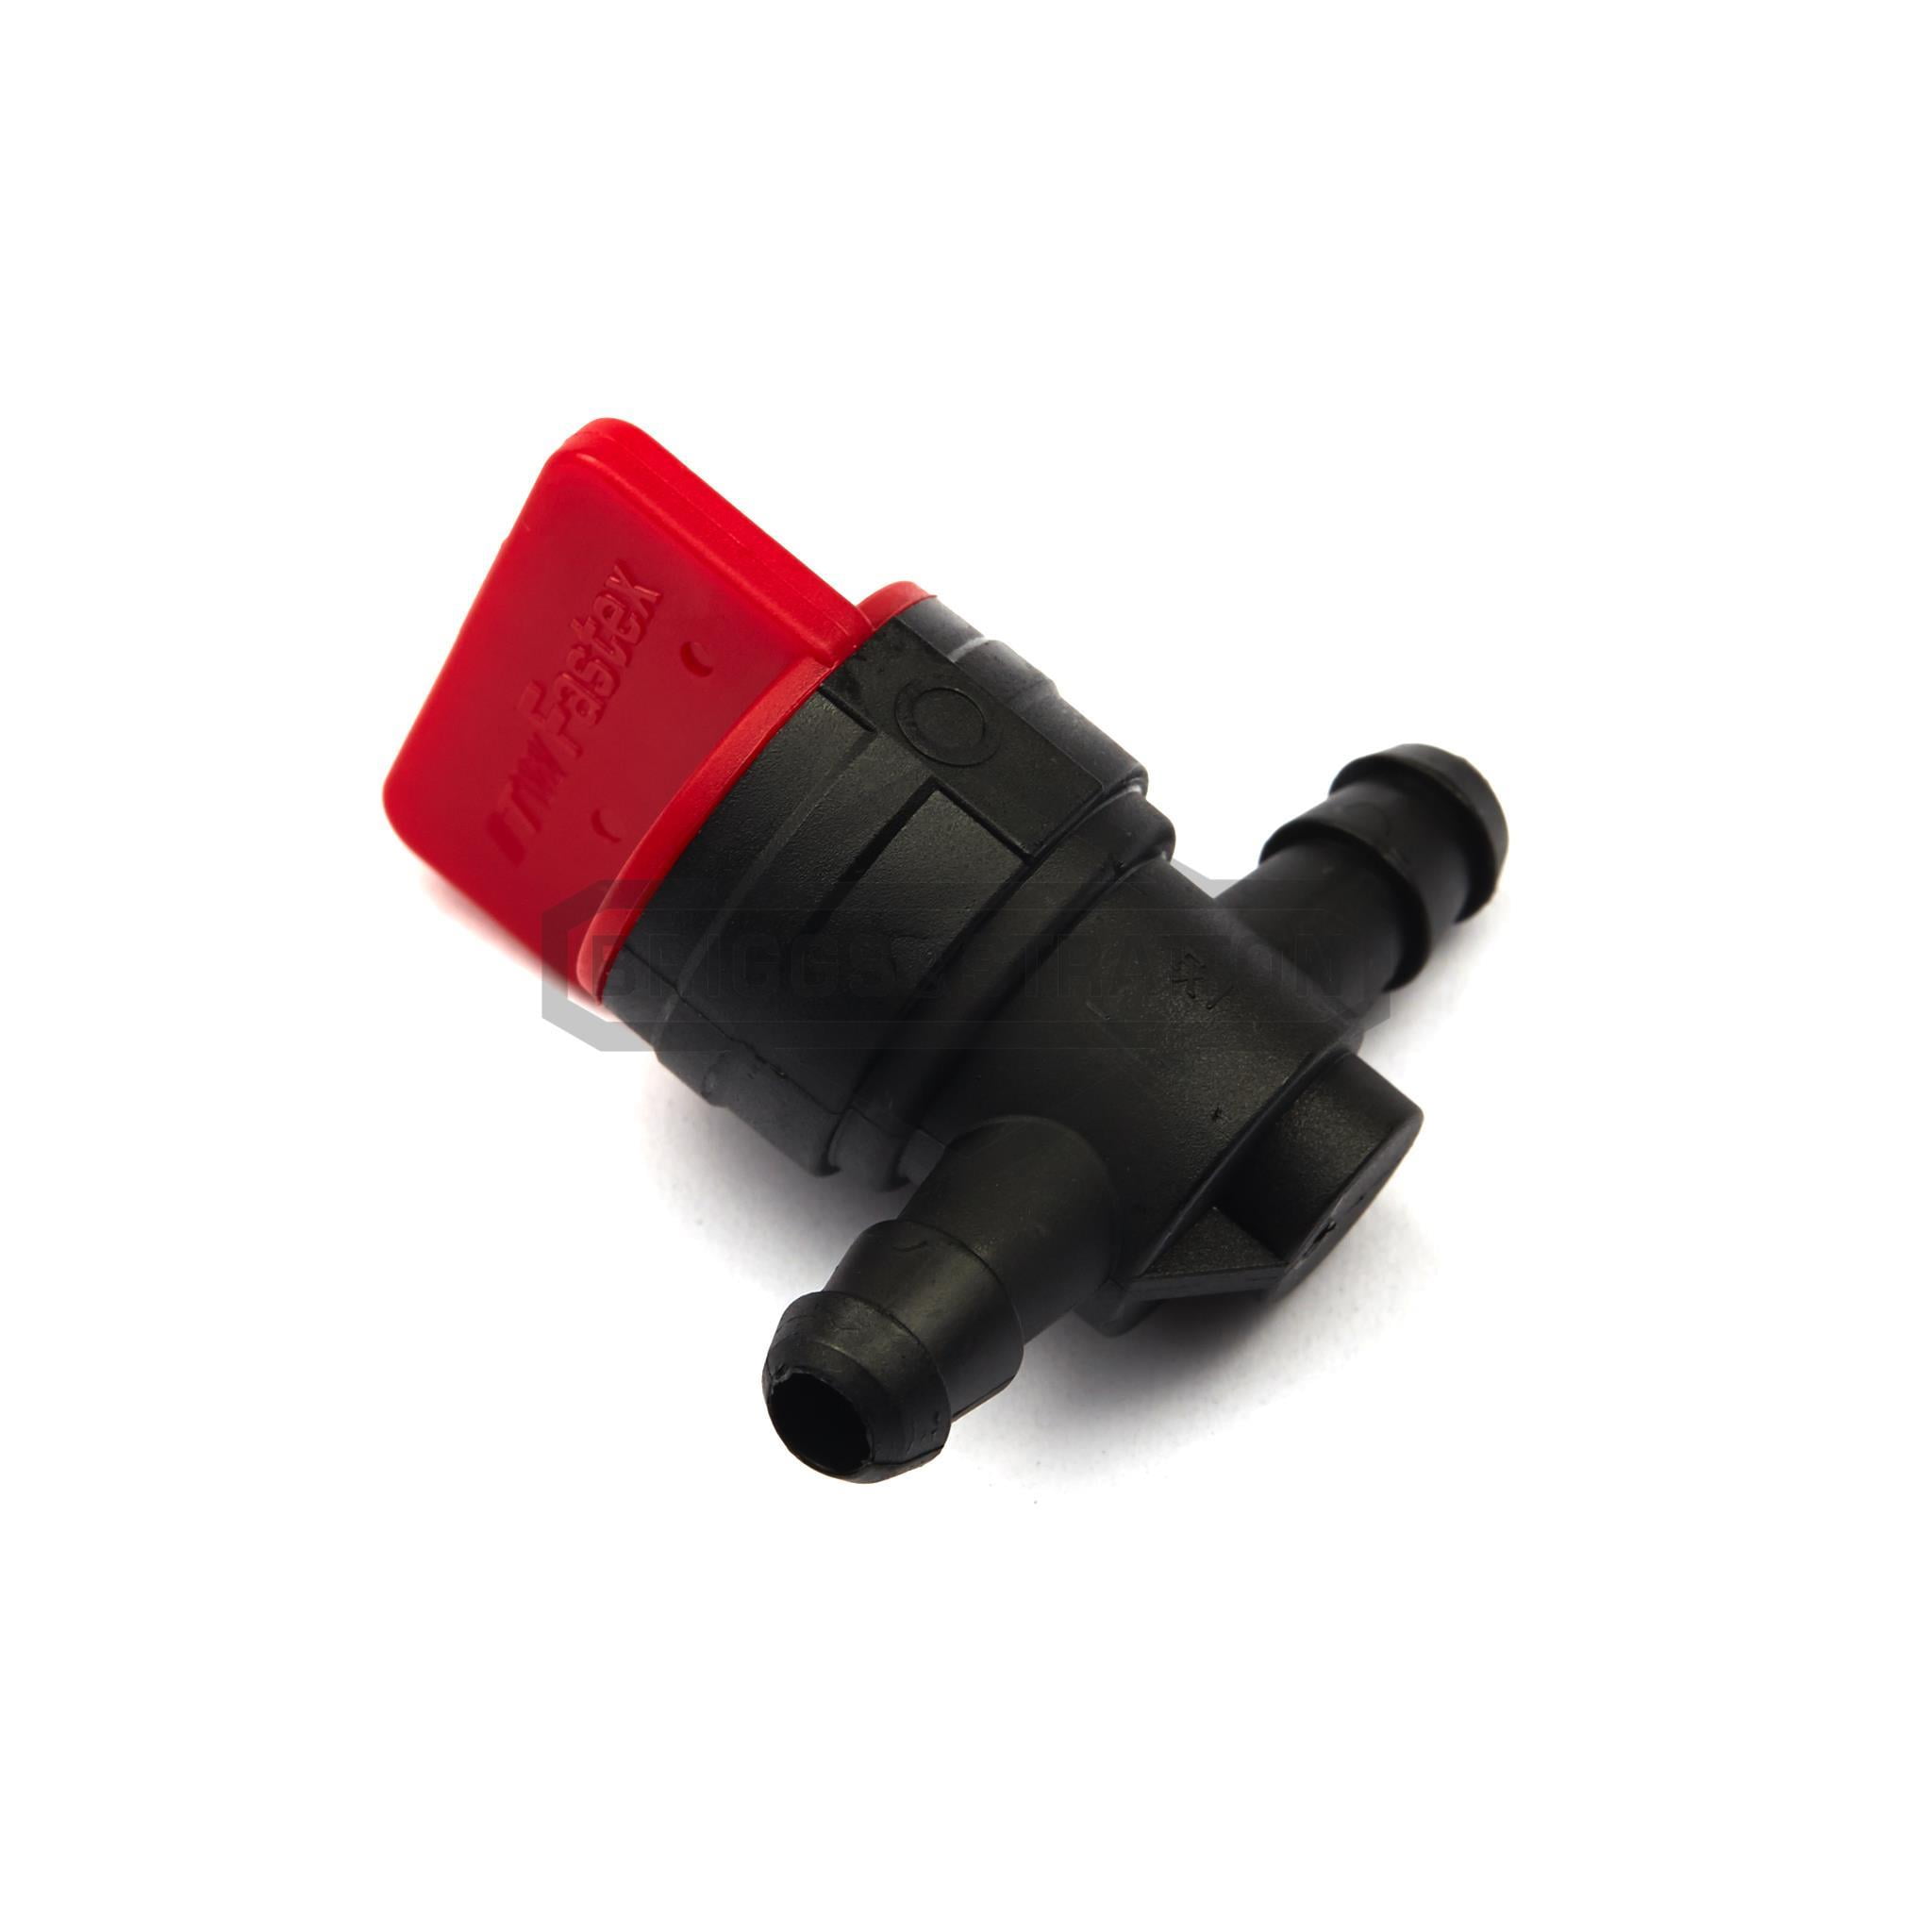 Compatible with 493960 698183 283207 95162S Oregon 07-406 JD AM36141 AM107340 Toro 54-3150 1-603770 Lawn Tractor Pressure Washer 494768 698183 1/4 Fuel Shut-Off Valve,Fuel Filter,Line,Clamps Kit